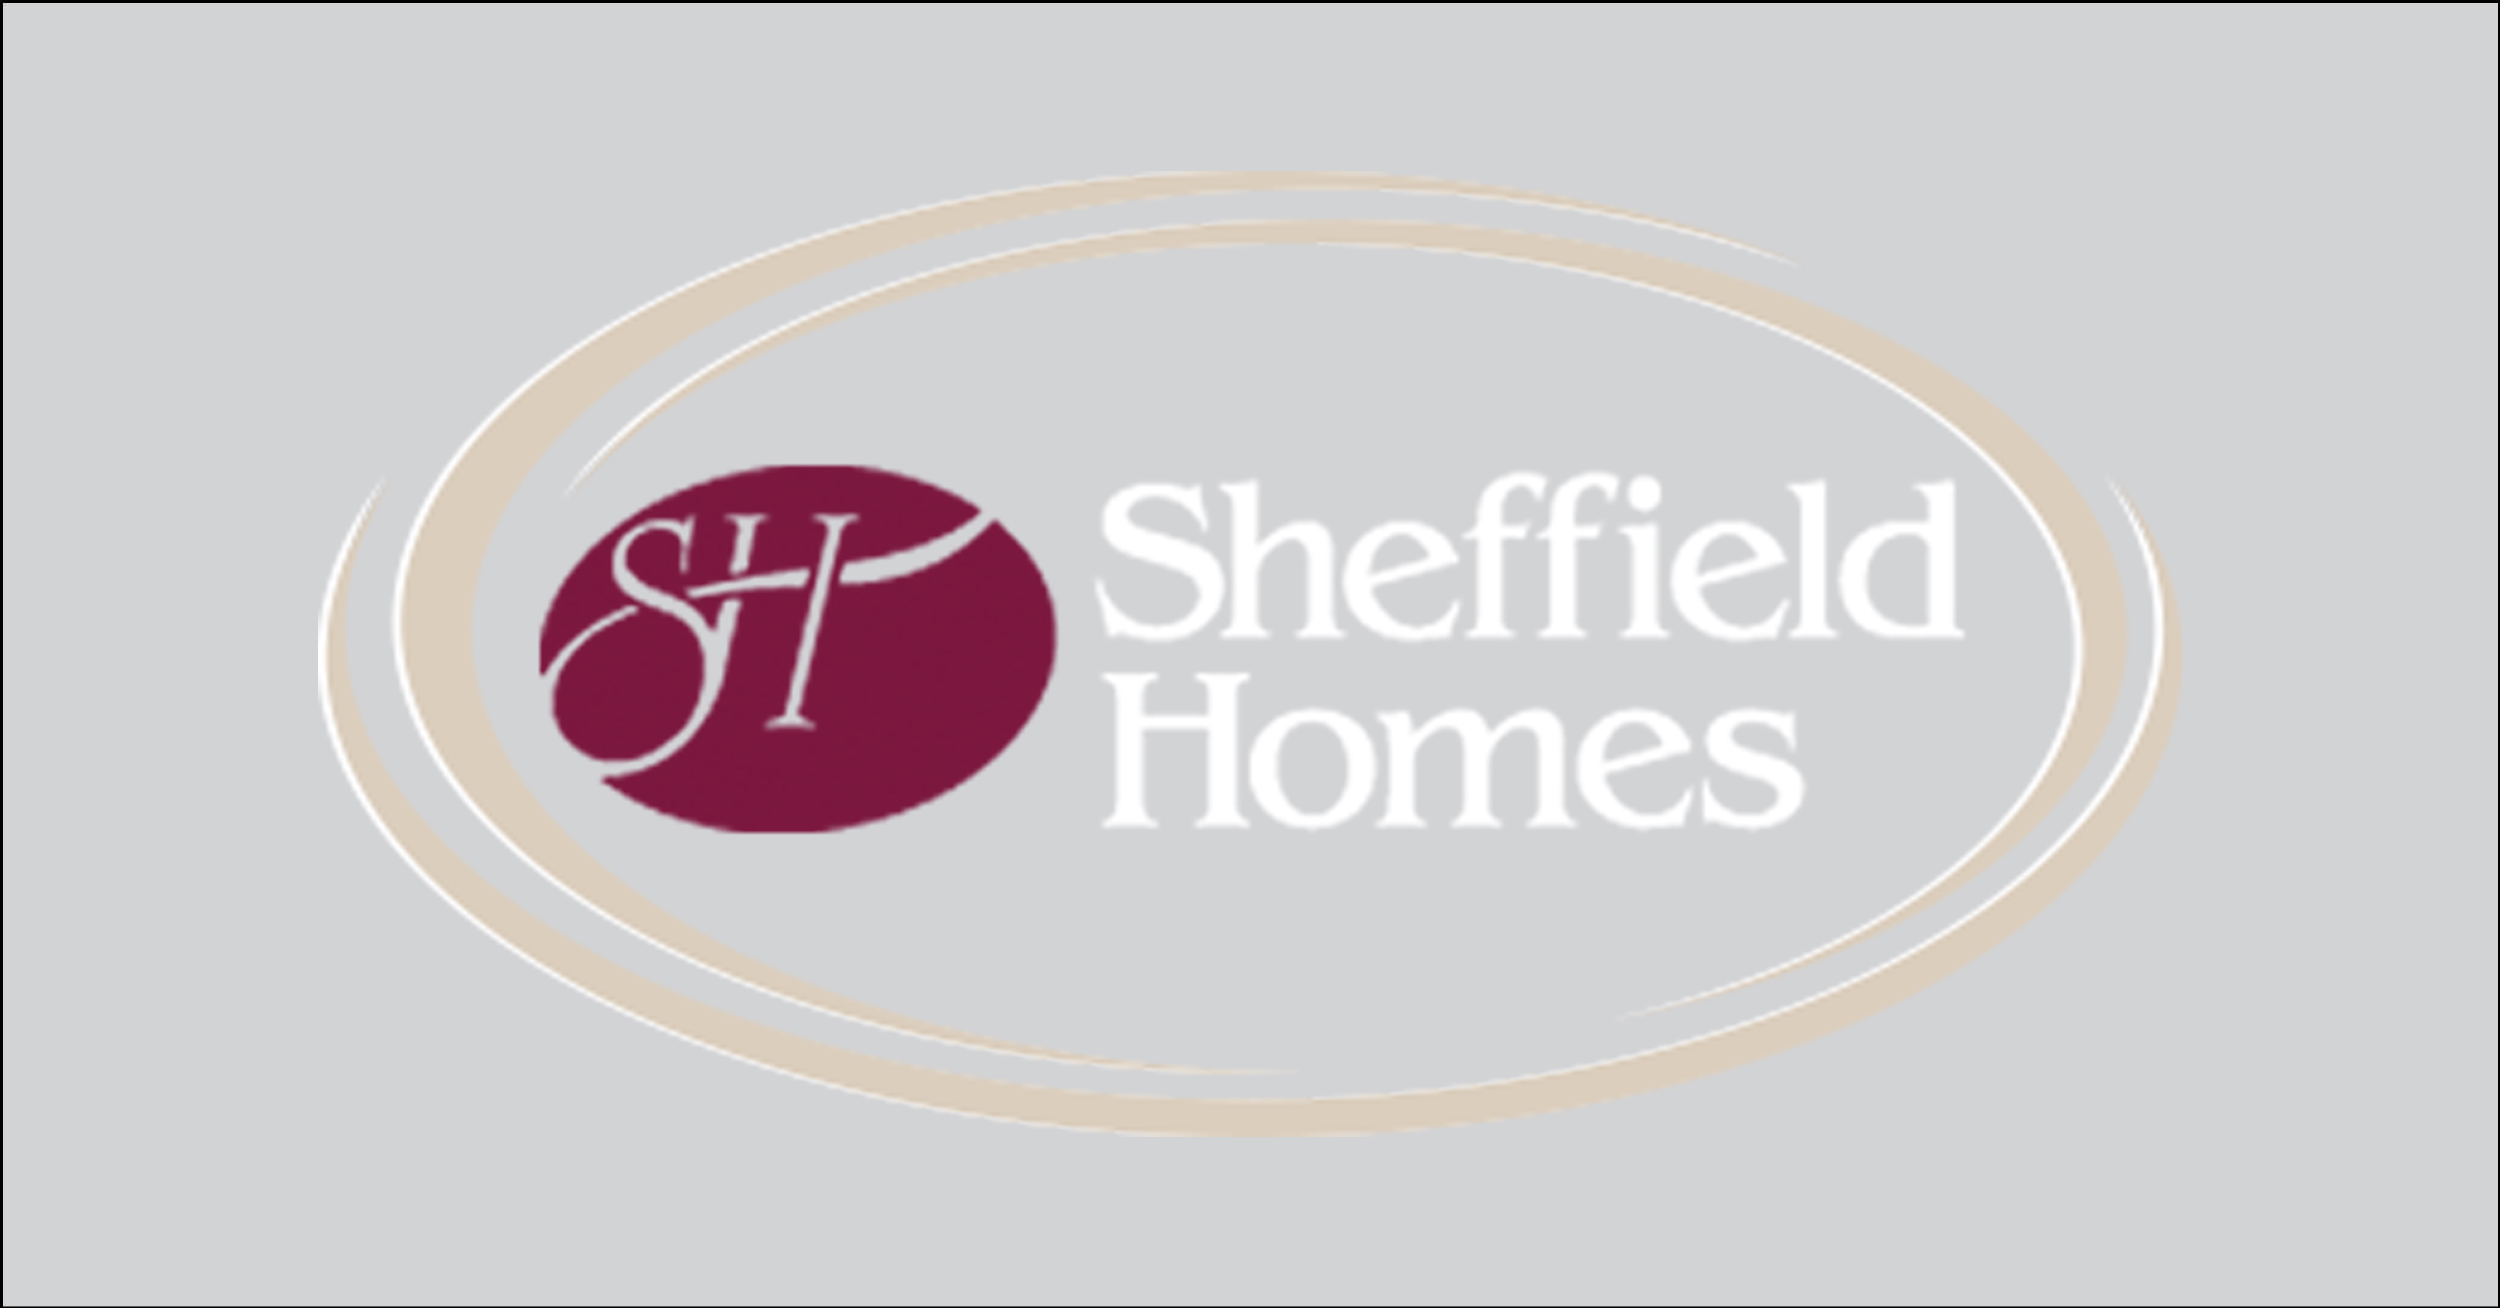 Find new construction or search for new homes and communities by Sheffield Homes in Colorado